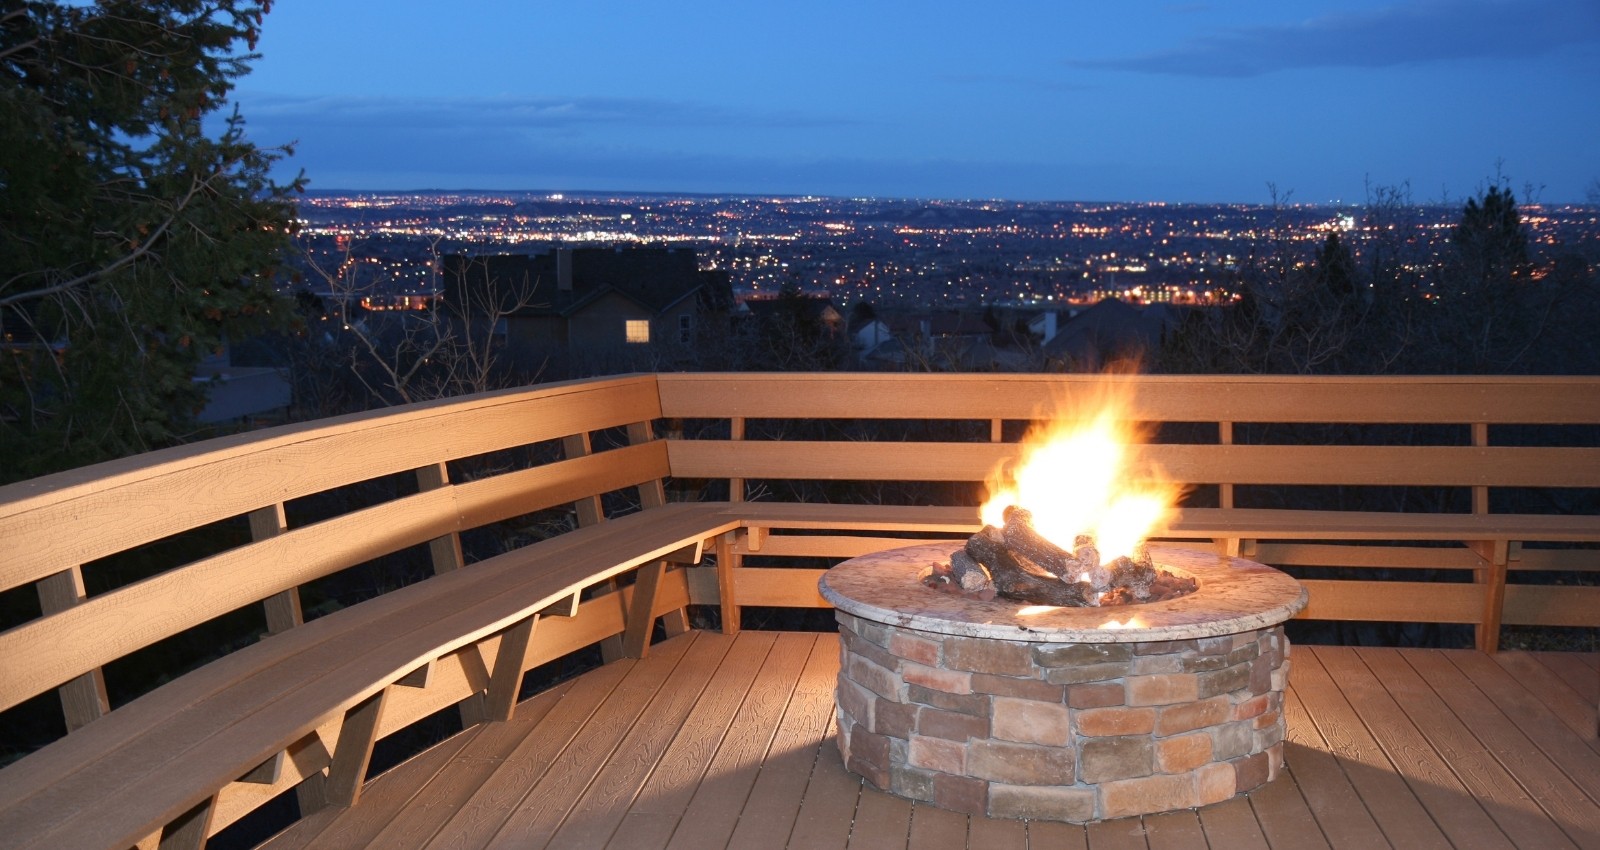 The Best Fire Pits For A Wood Deck, Is It Ok To Put A Propane Fire Pit On Wooden Deck